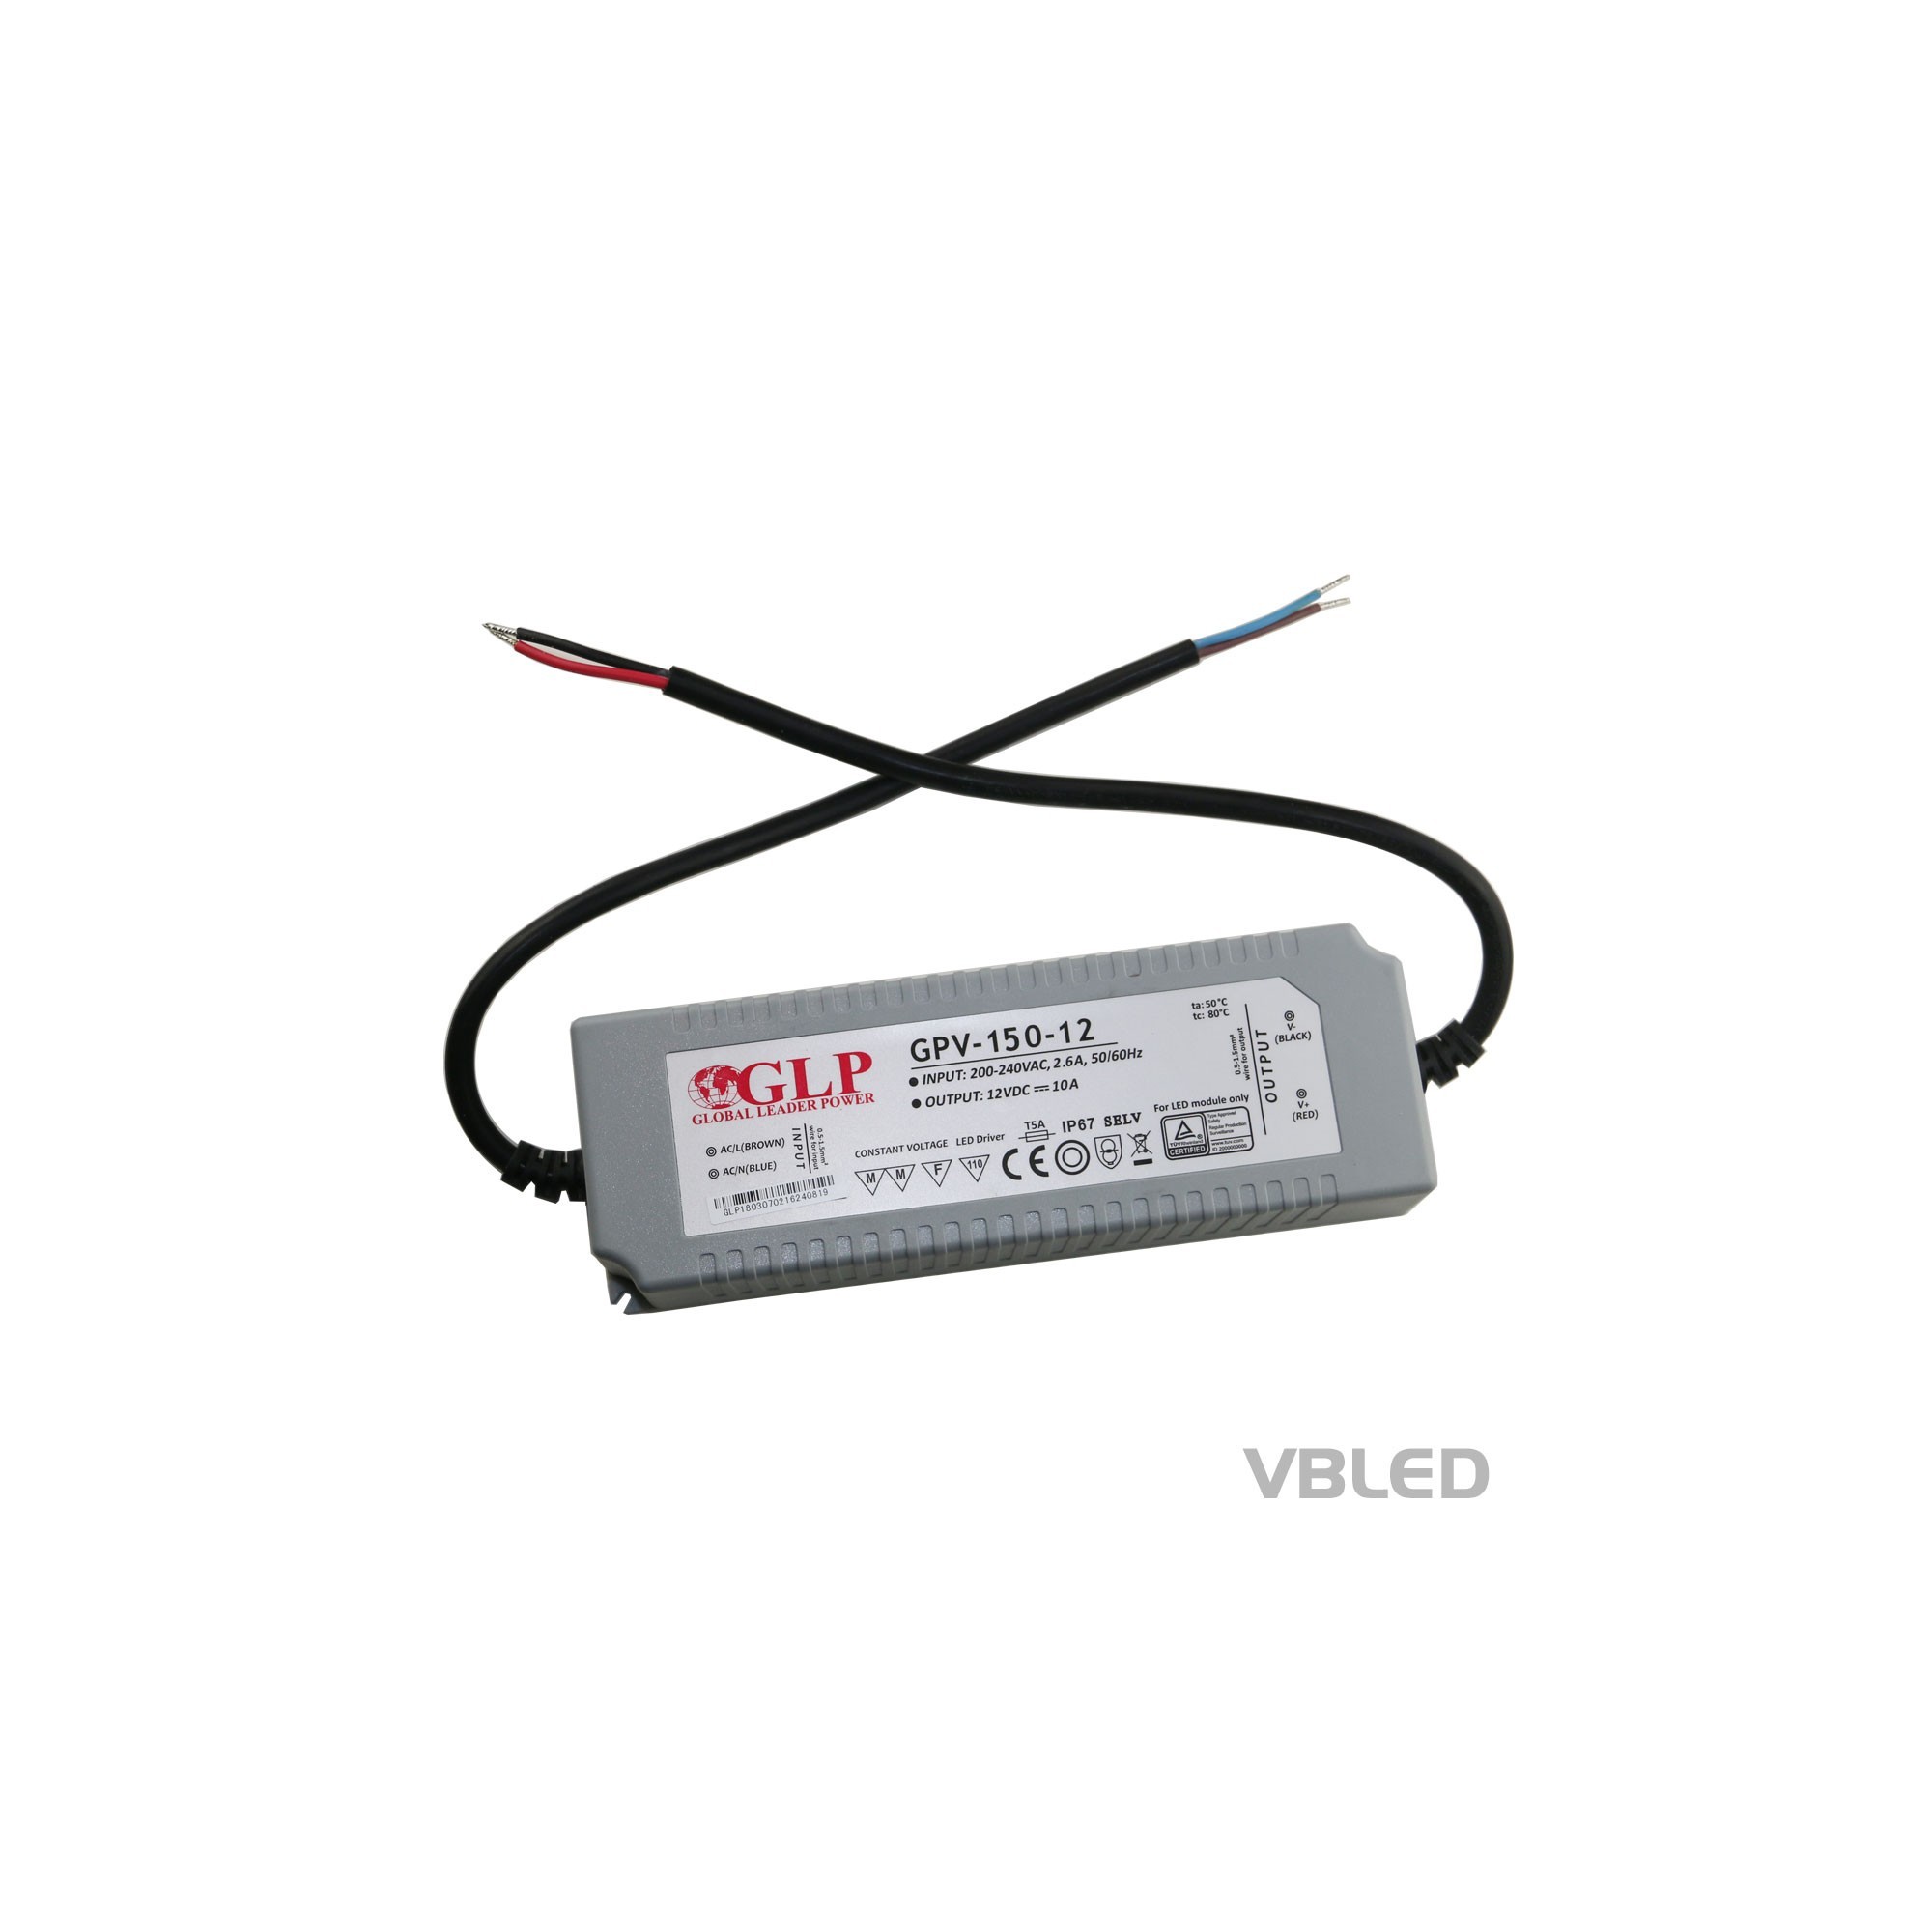 LED voeding constante spanning / 12V DC / 120W IP67 waterdicht